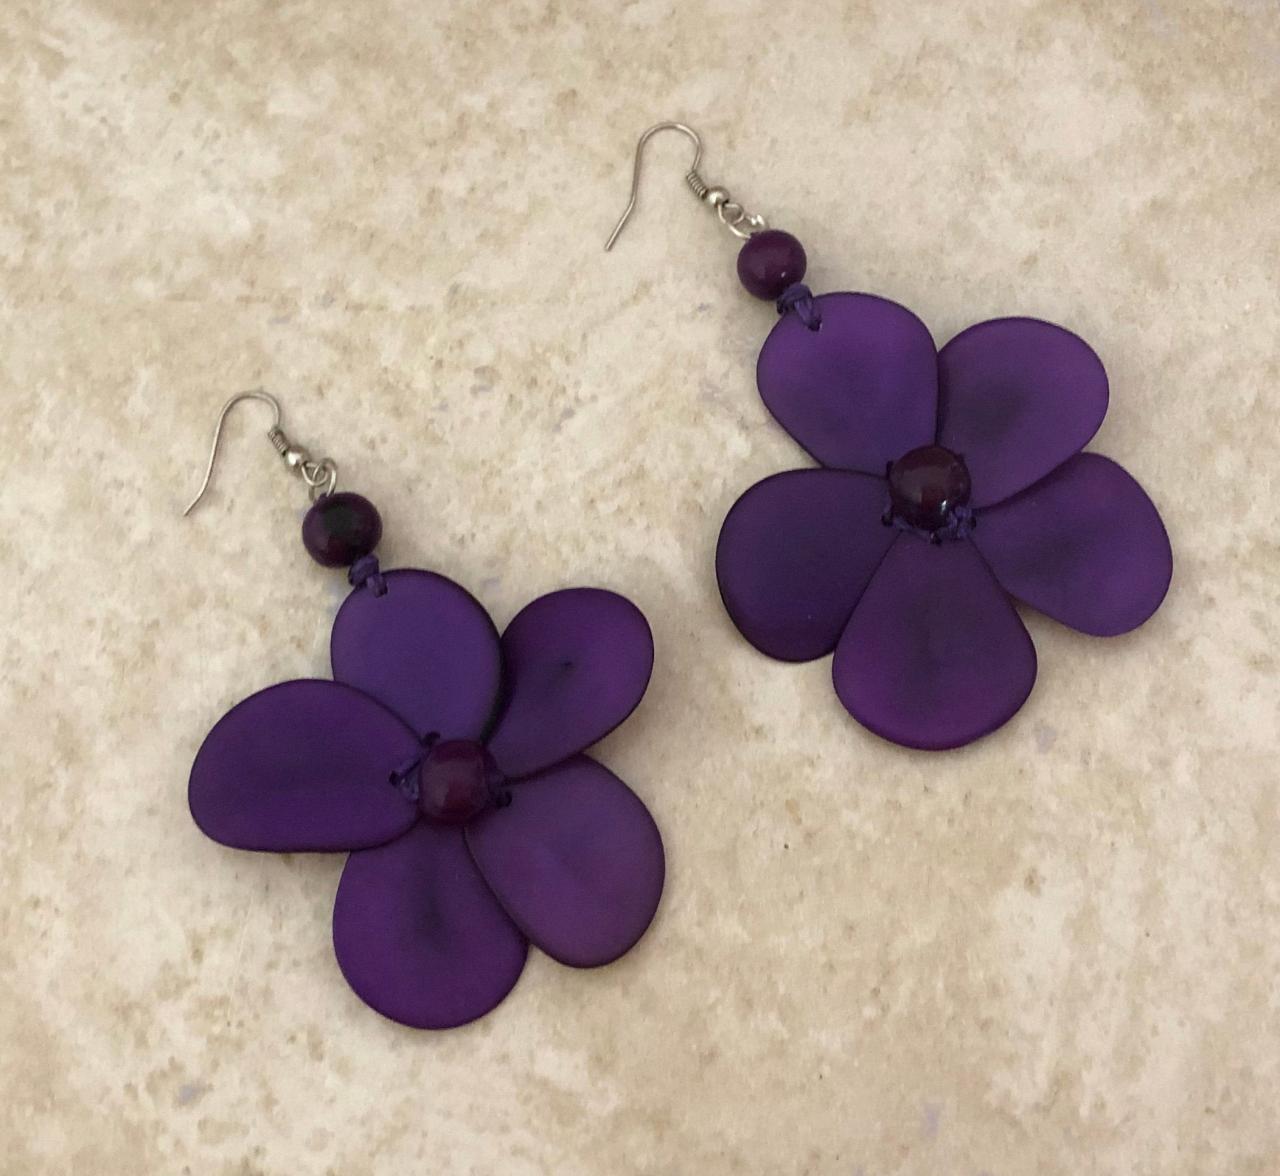 Purple Earrings, Flower Earrings, Holiday Gifts,statement Earrings, Christmas Gift, Handmade Gifts, Black Friday Gifts, Women Gifts, Unique